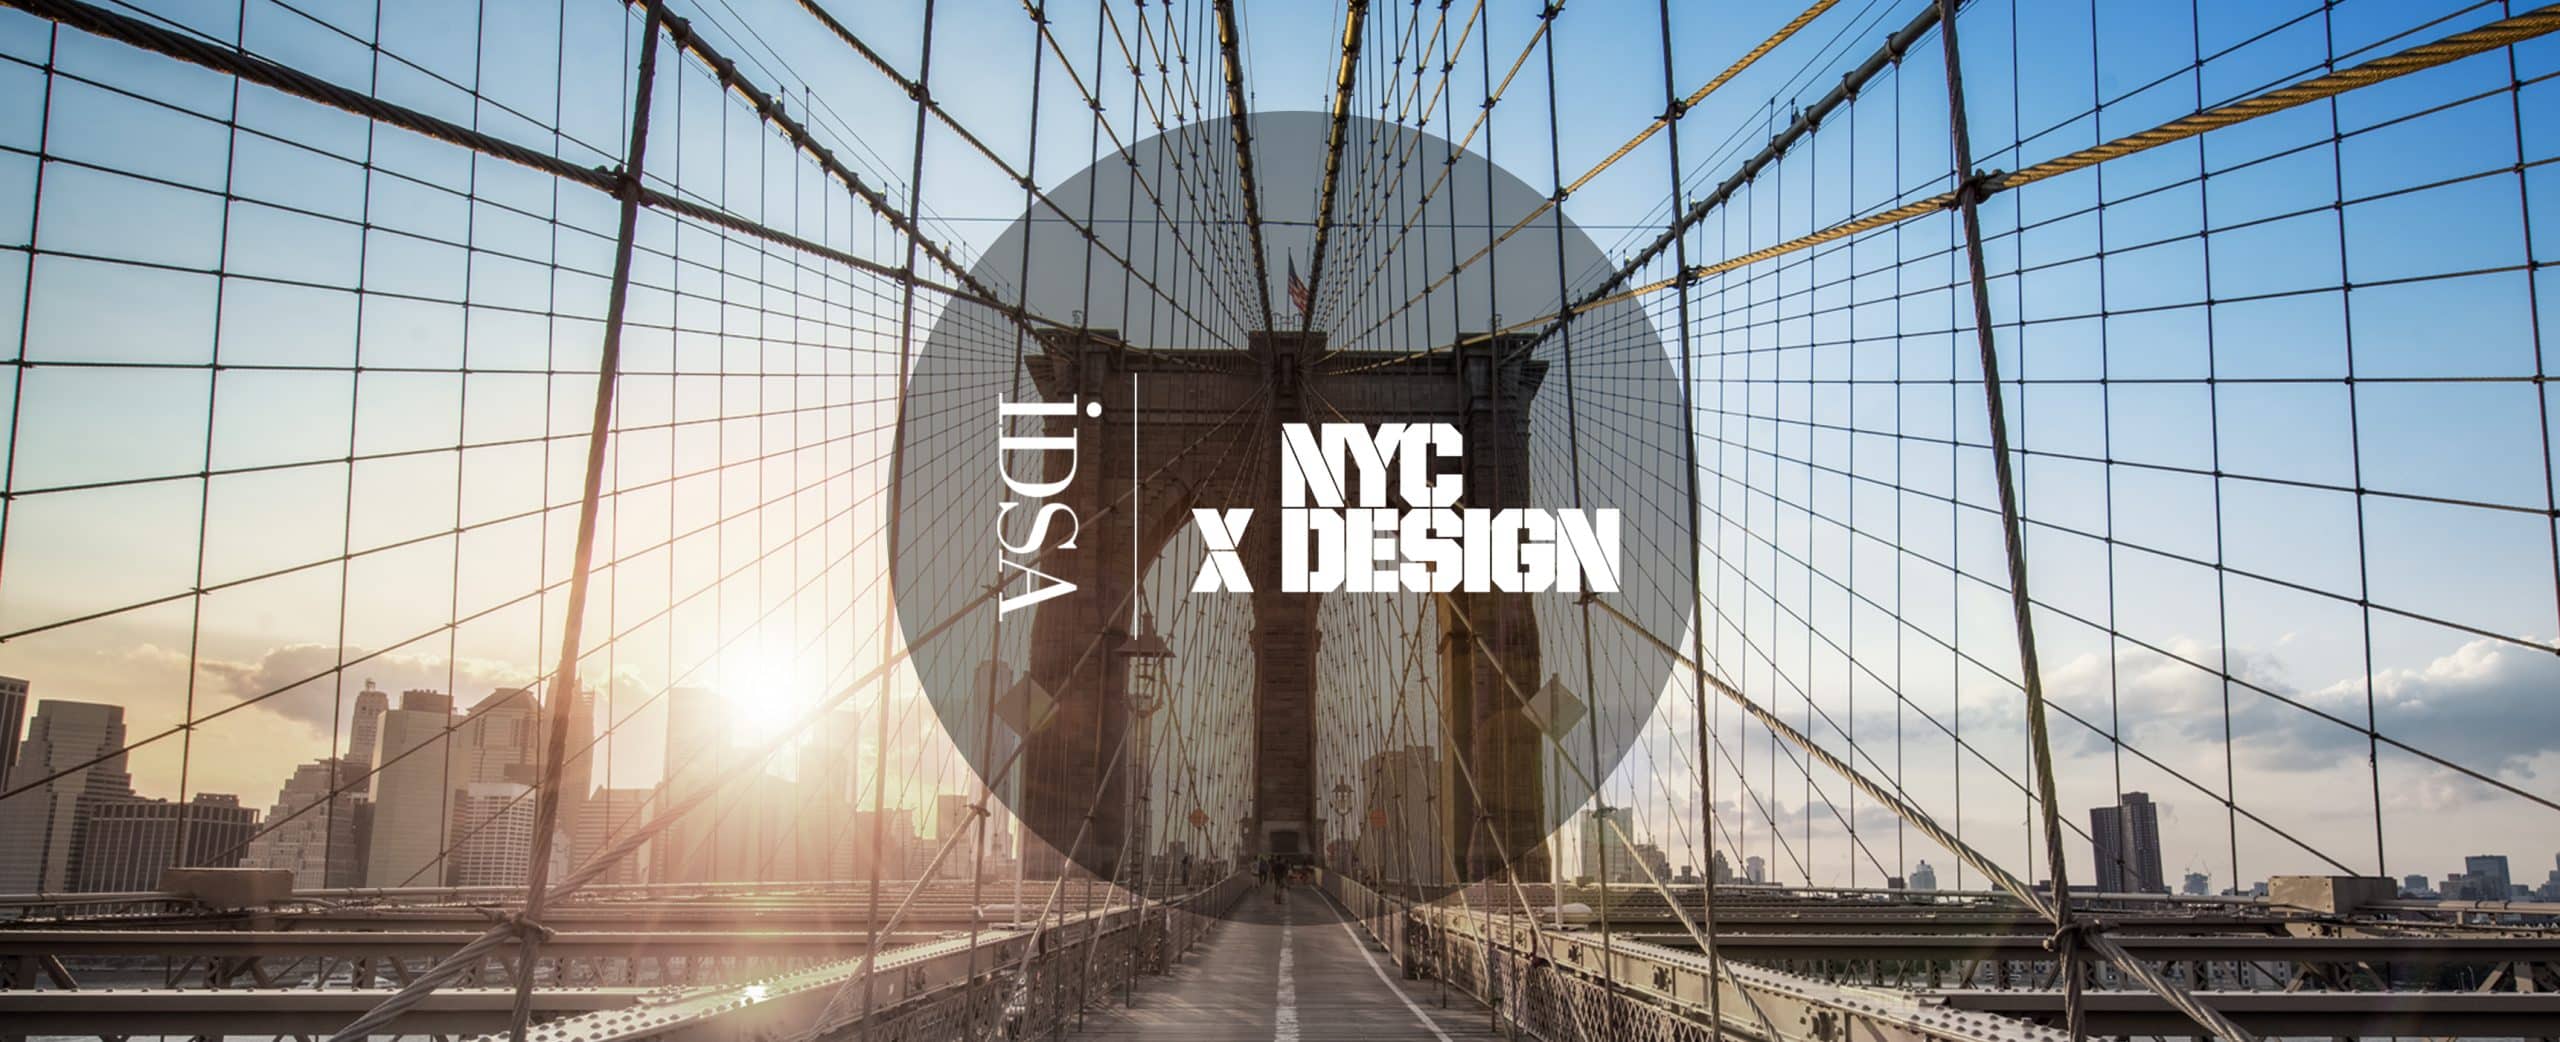 NYCxDESIGN-Banner_0